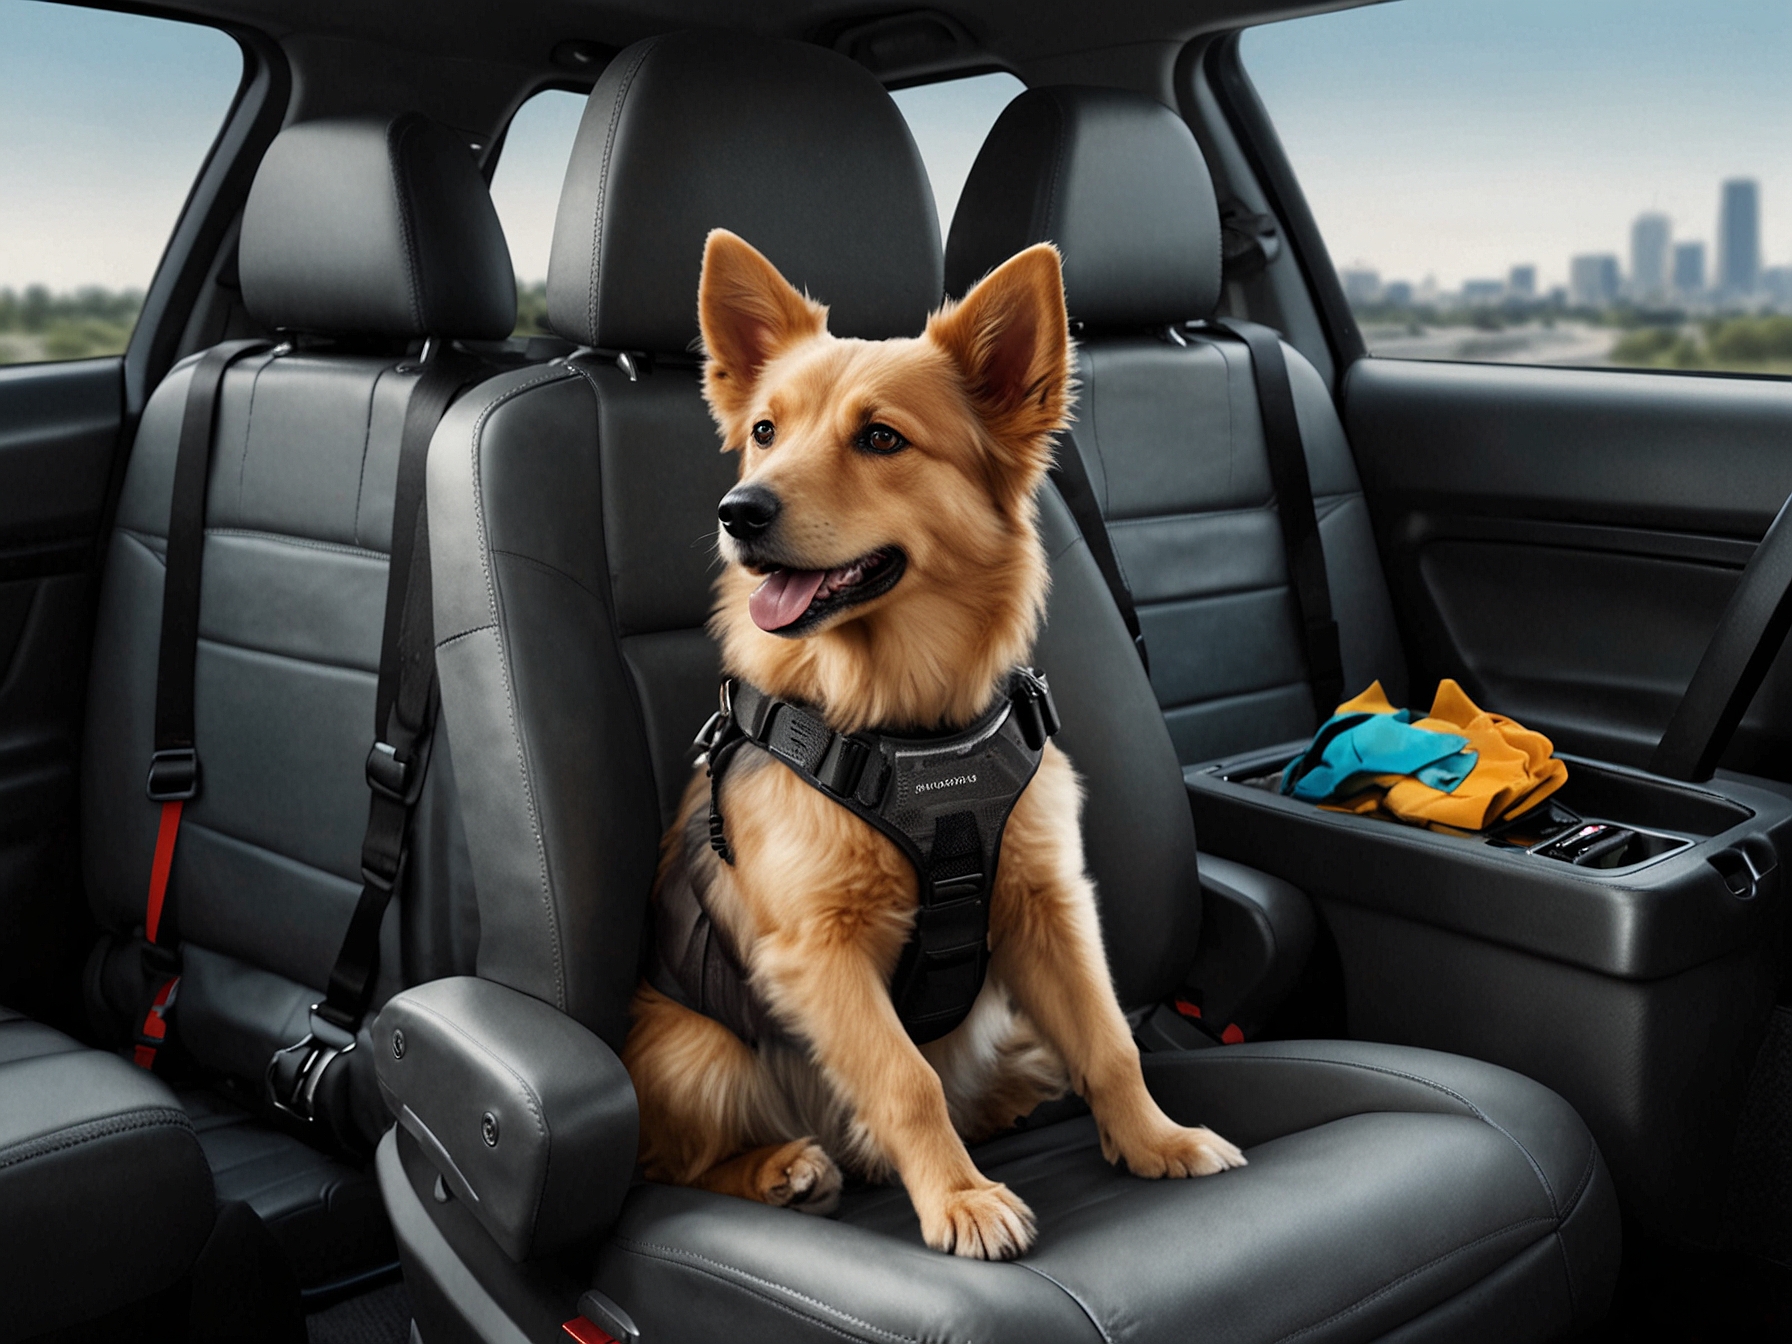 An image depicting different types of pet restraints, including harnesses, carriers, and specially designed car seats for dogs, highlighting safety measures for traveling with pets.